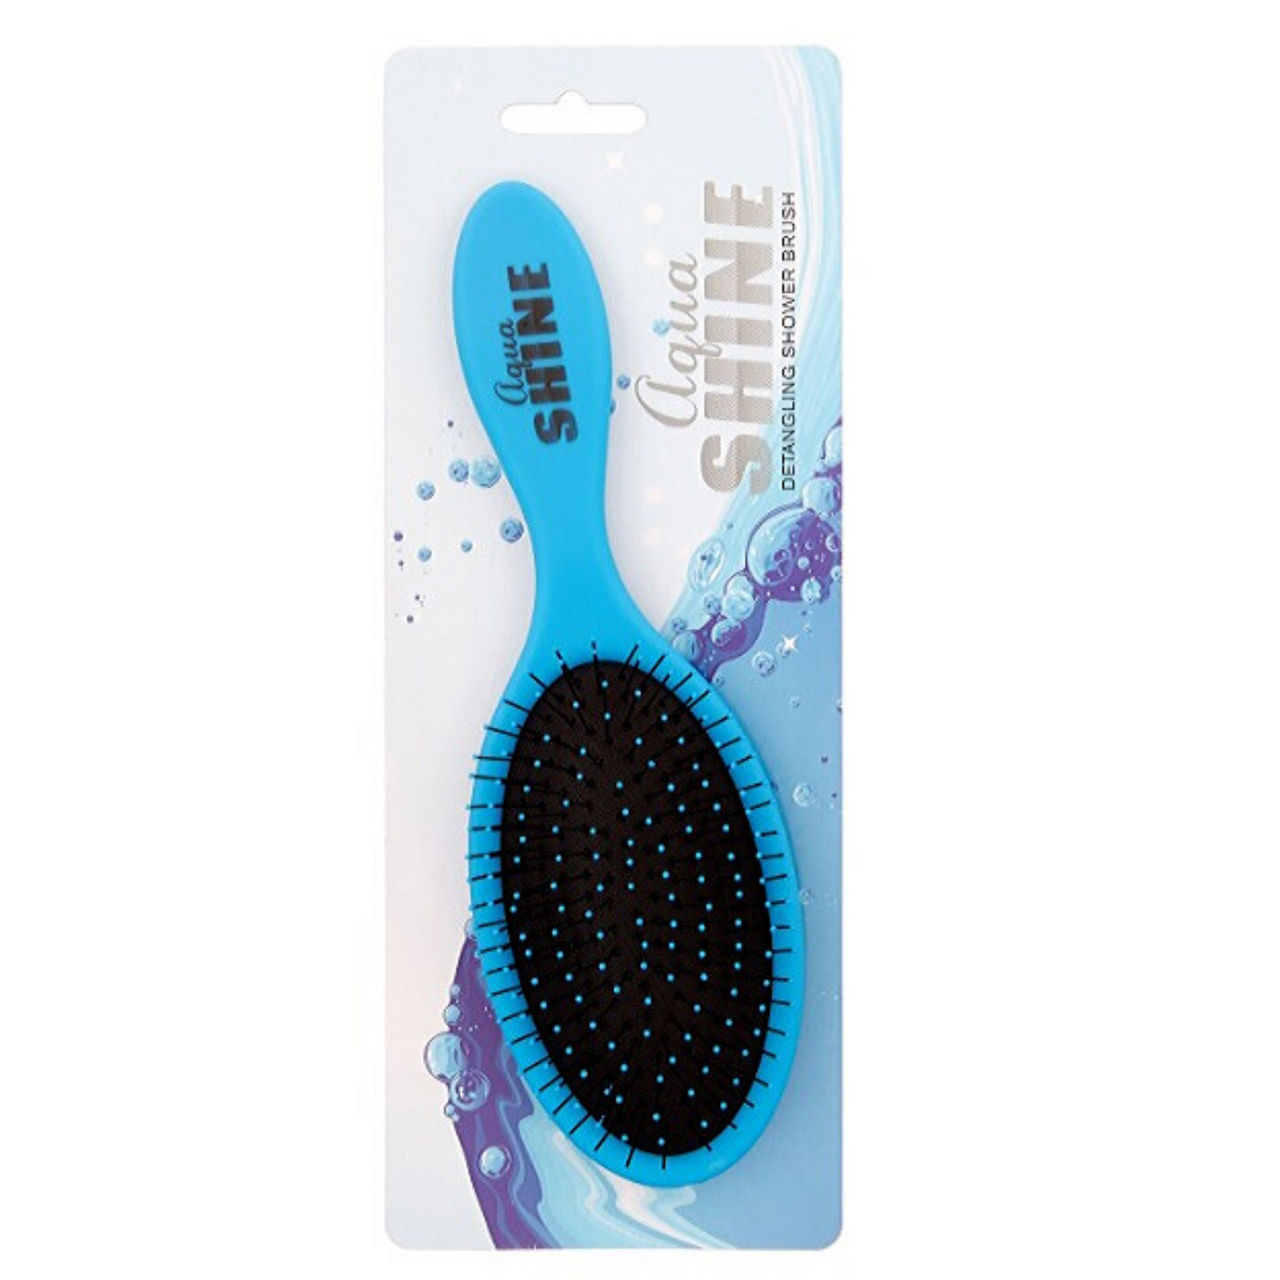 Wet Dry Brush Soft Flexible Bristles Detangles and Smooths with Ease - Blue